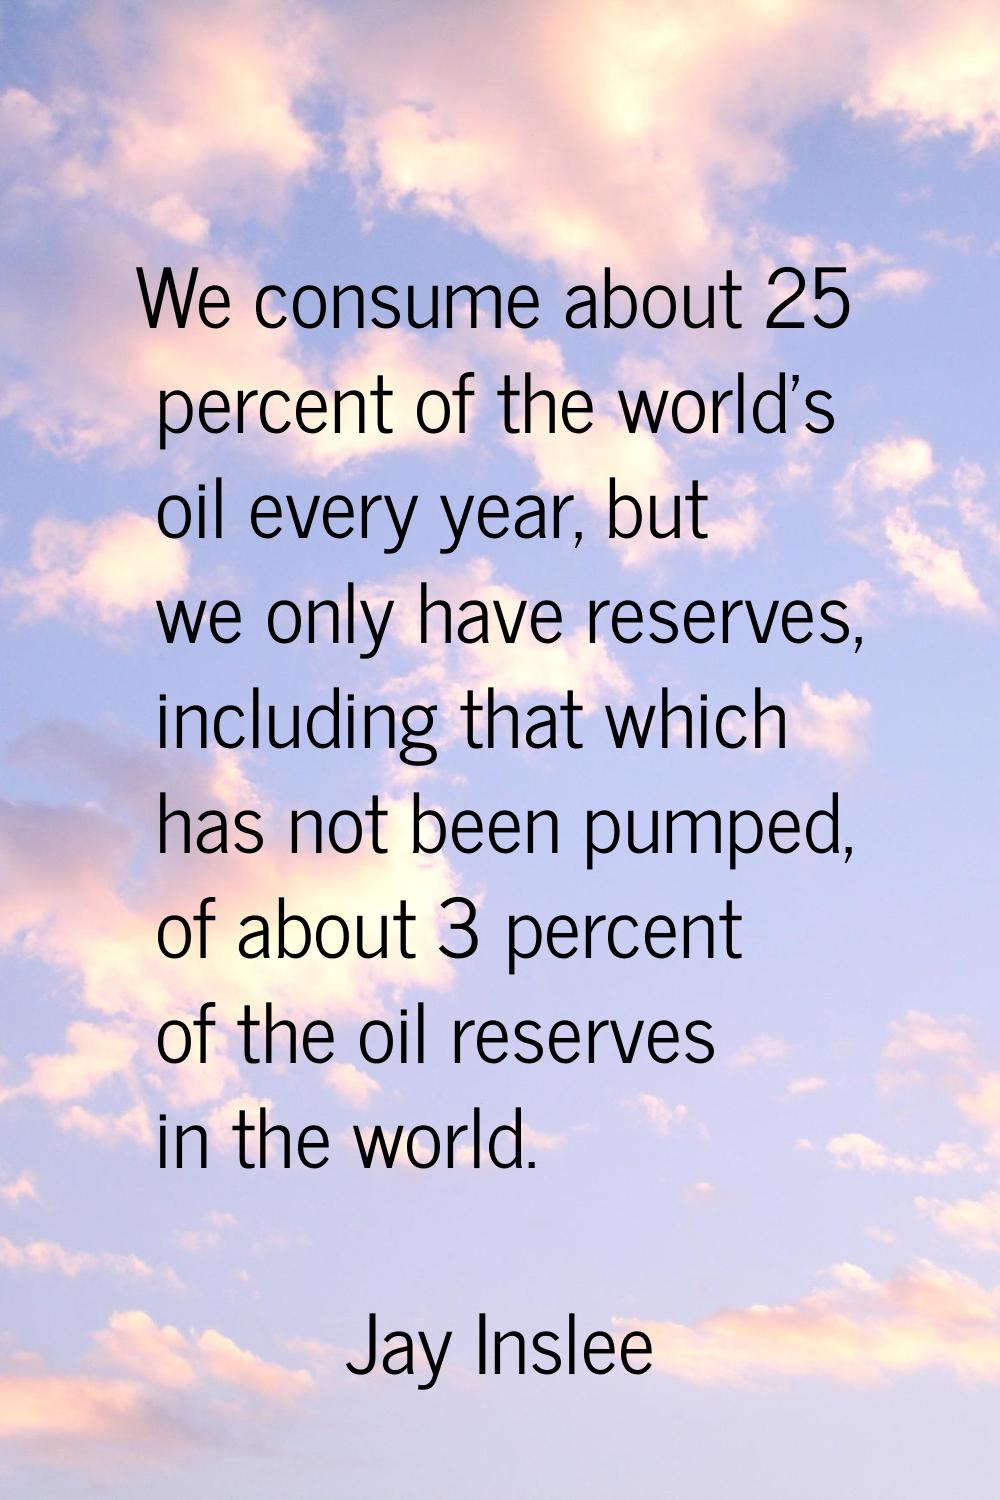 We consume about 25 percent of the world's oil every year, but we only have reserves, including tha